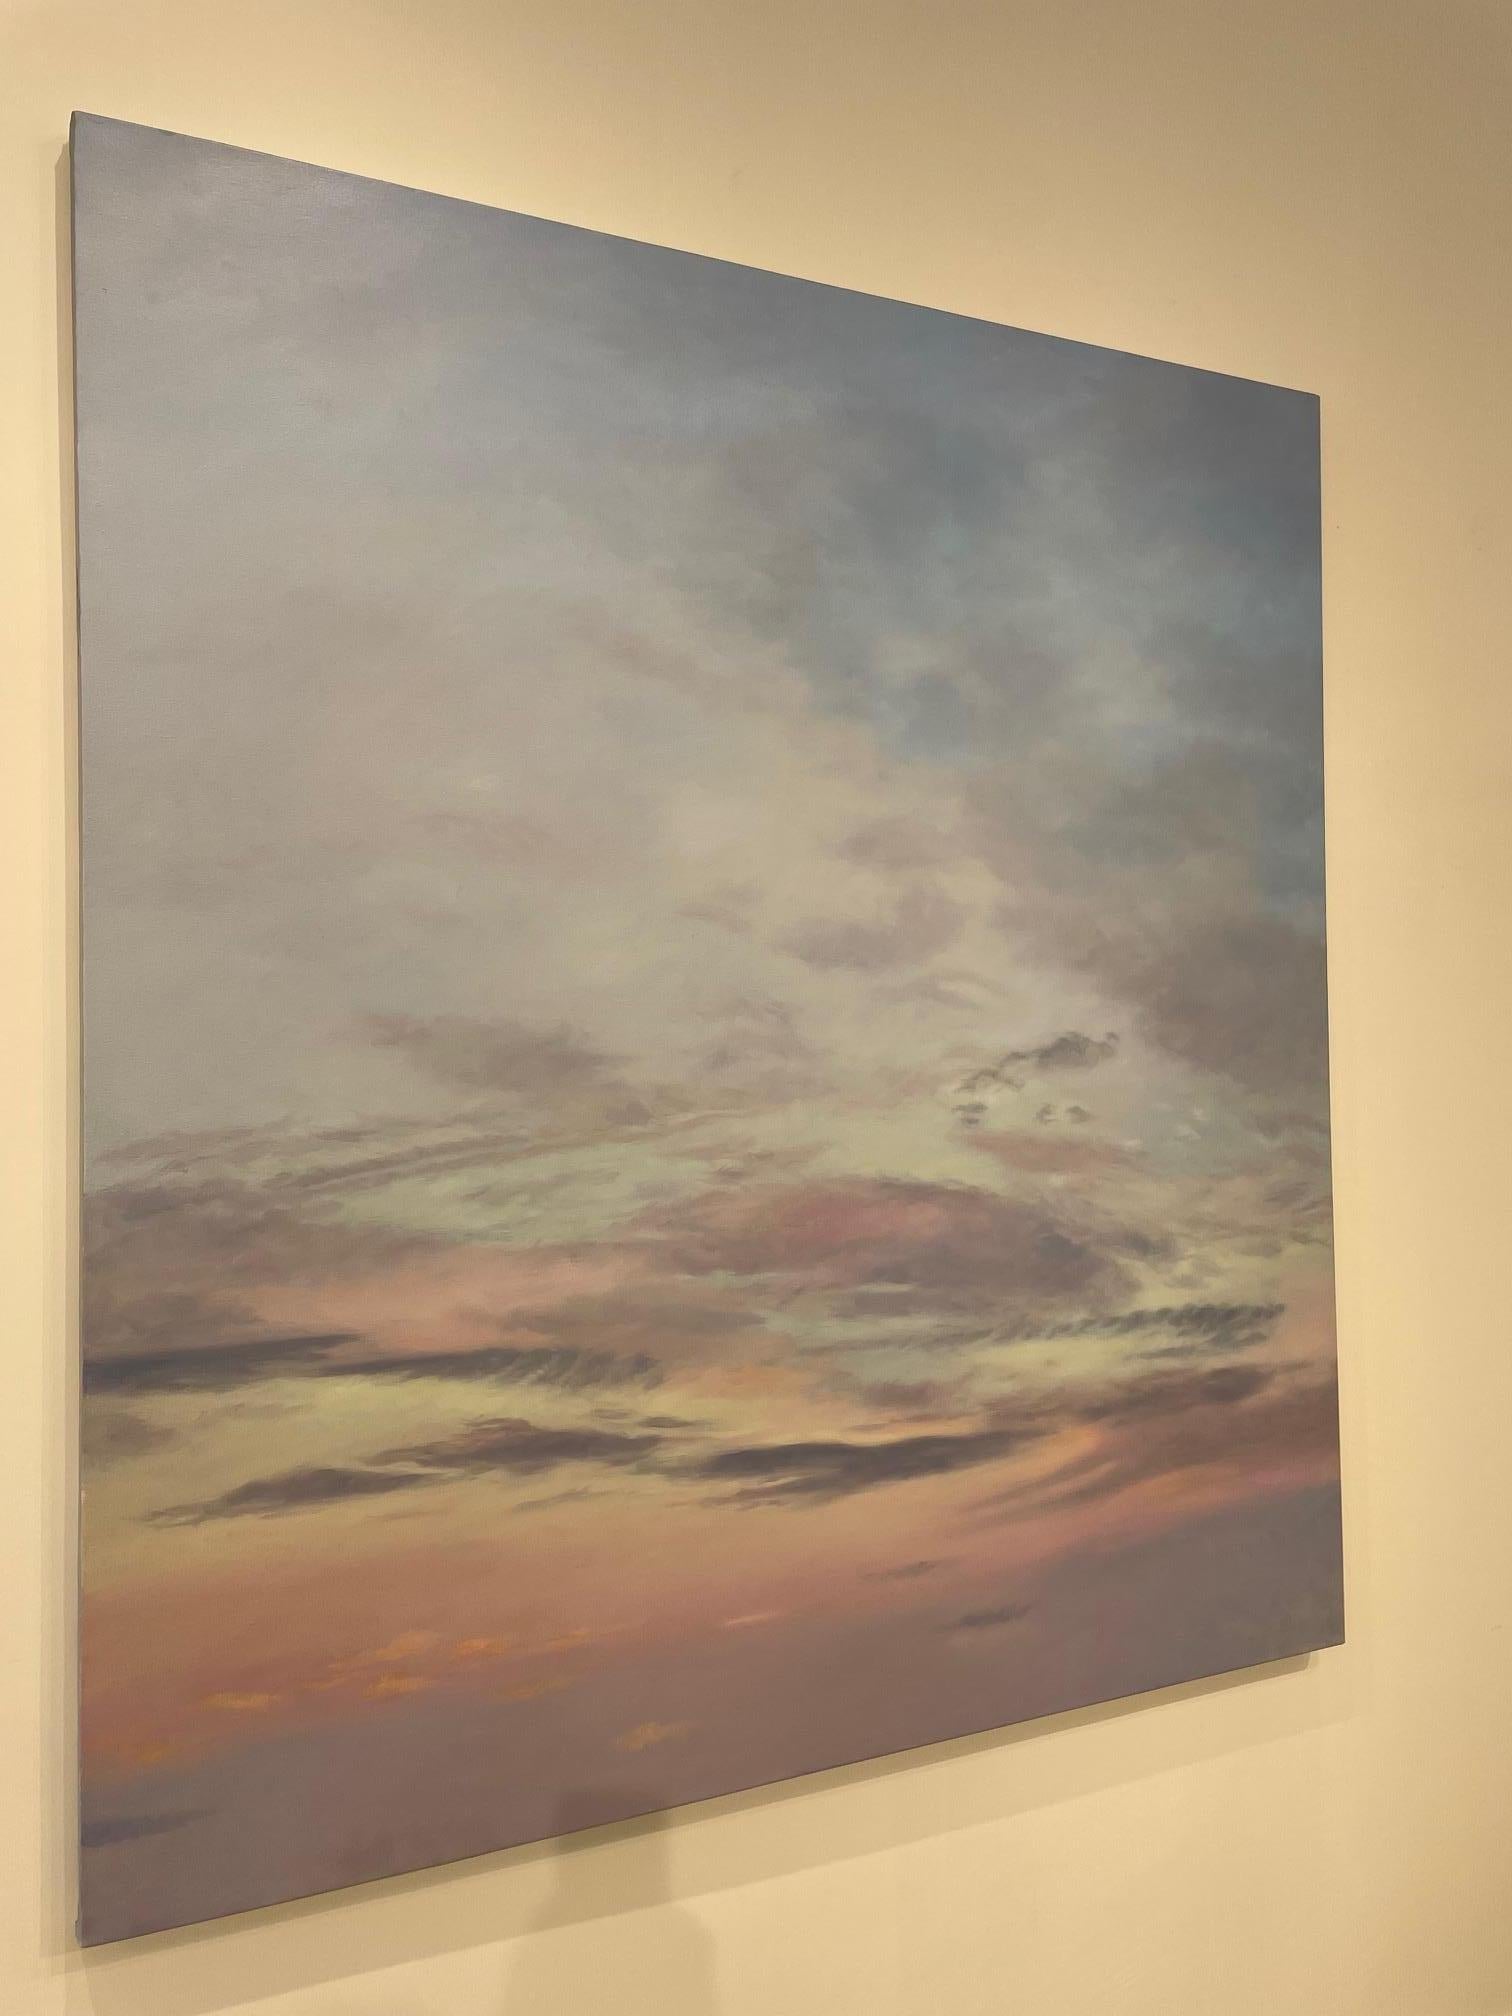 Ann's Skies I, oil on canvas, 65 x 60 inches. In new condition by Willard Dixon. Artist signed and dated. Beautiful sky painting celebrating natures abstractions through the American Realist painter's lens. This painting was created as three sky